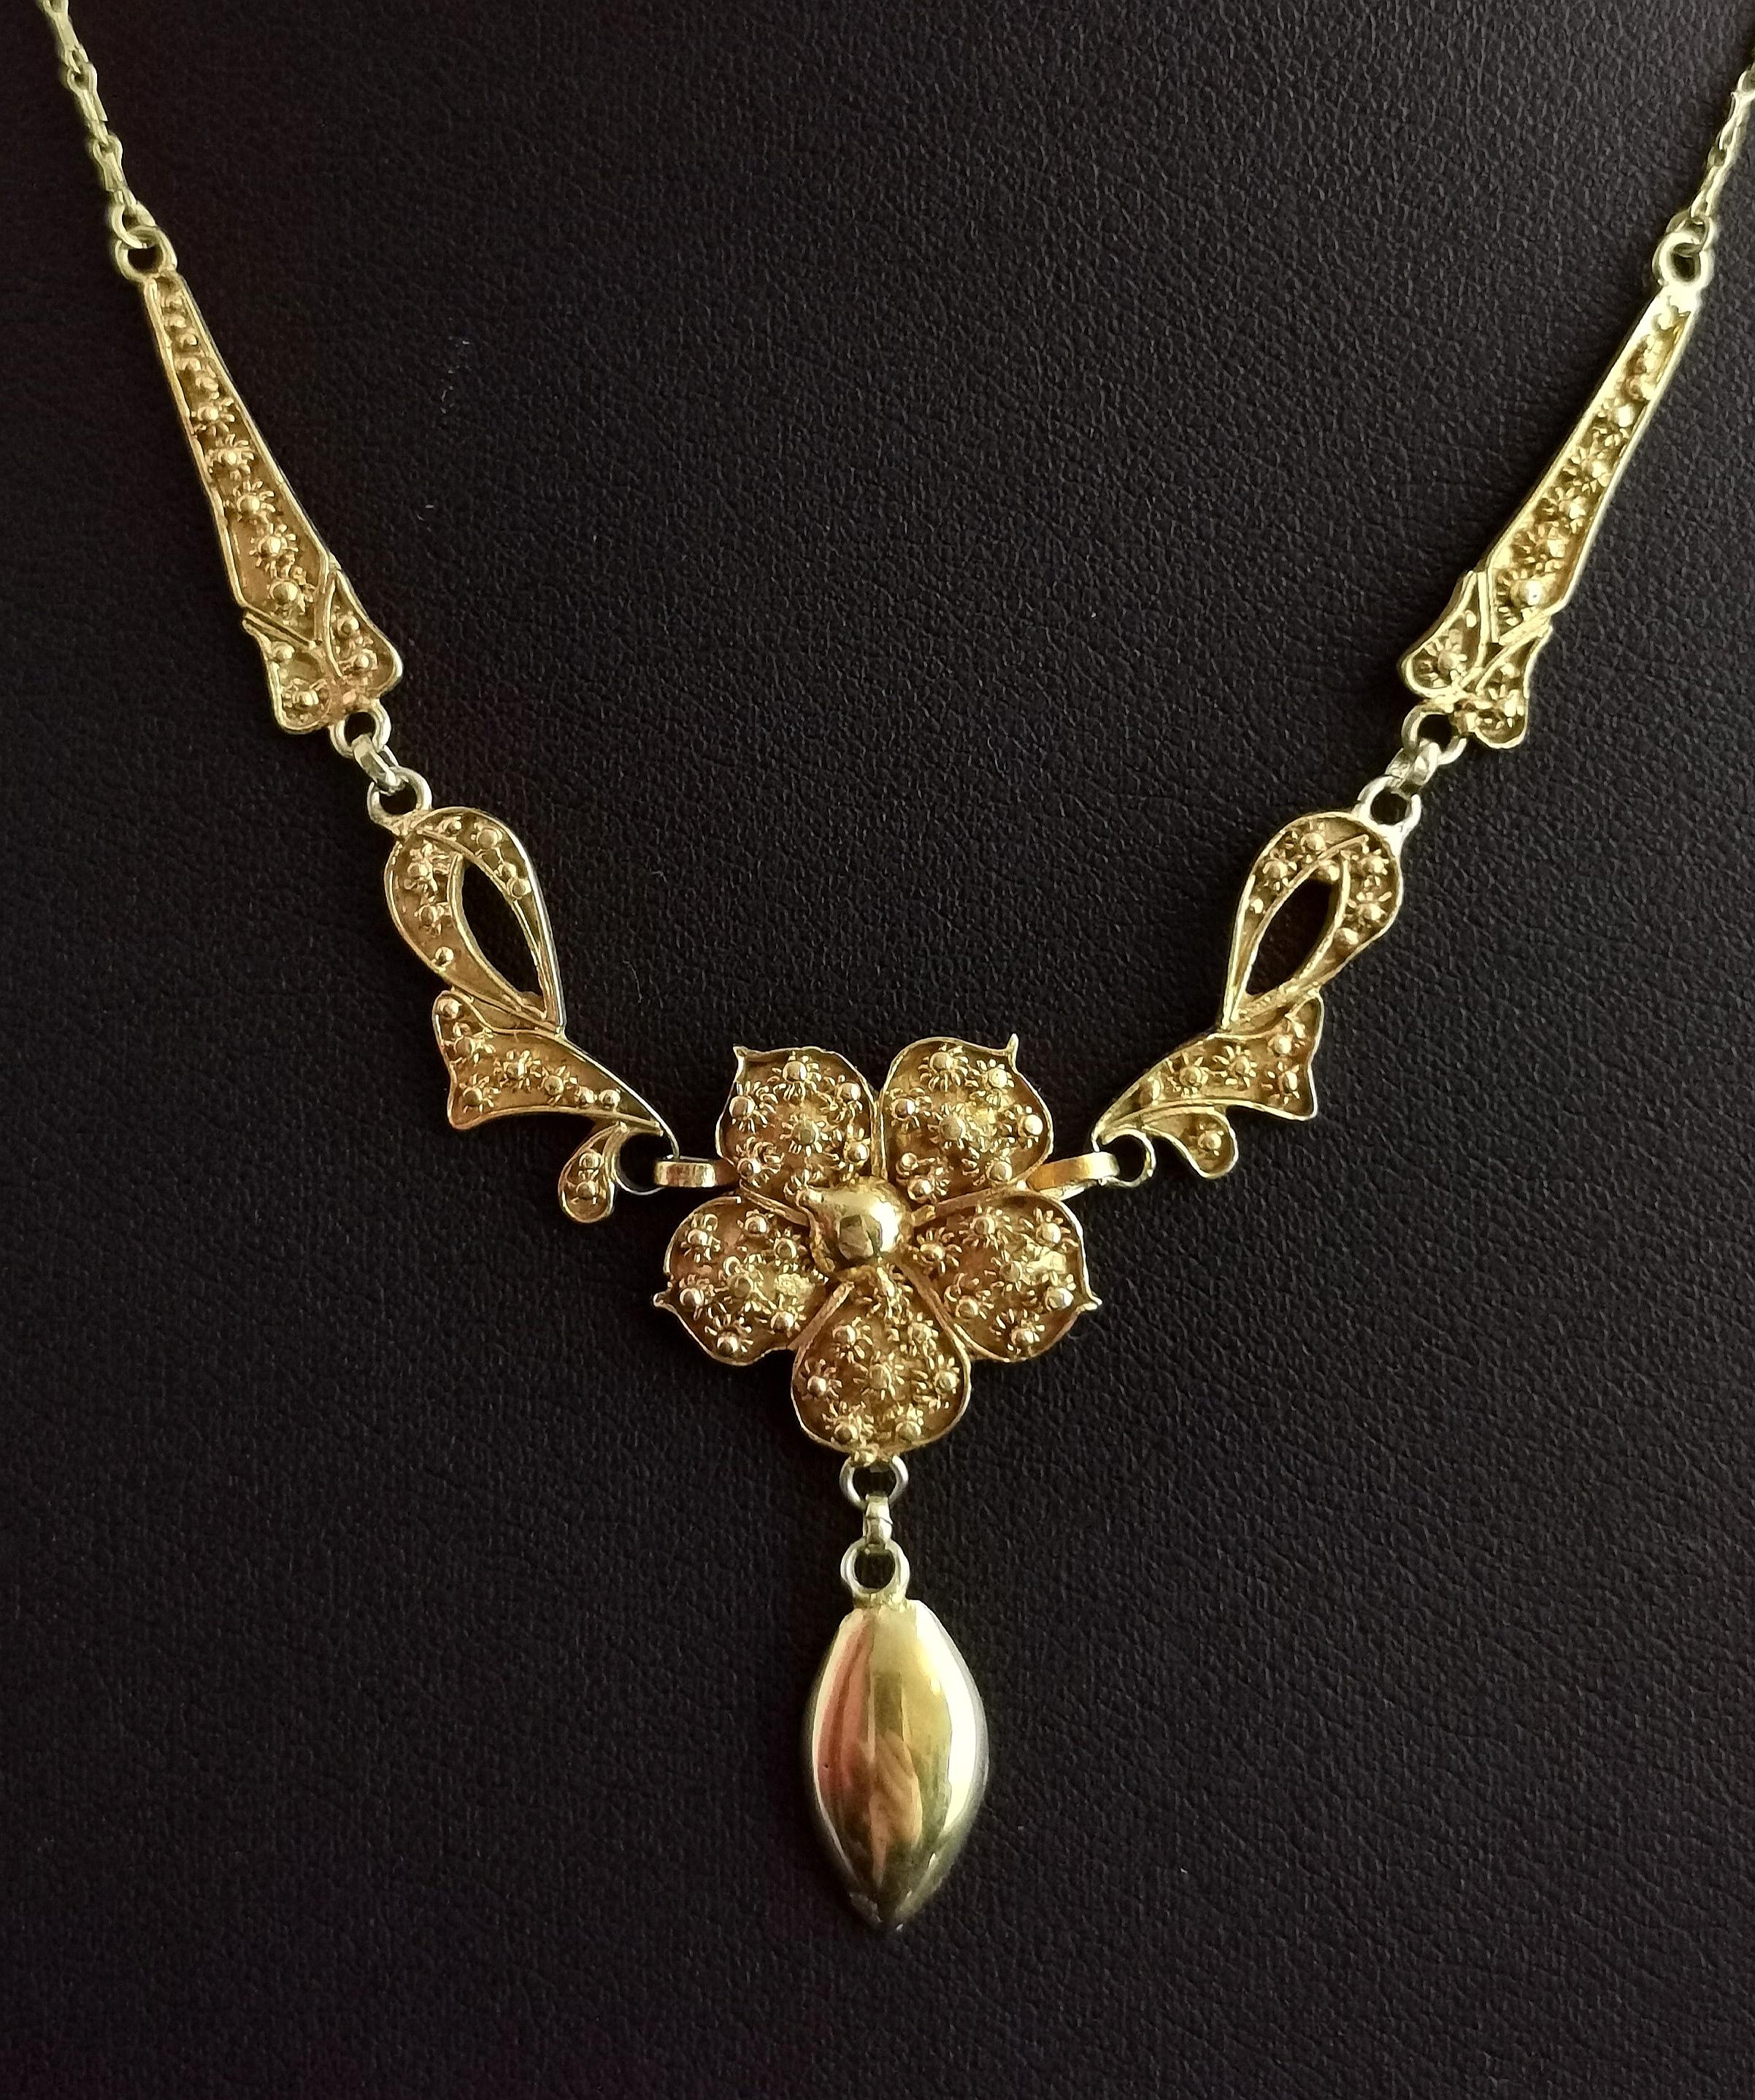 We can't get enough of this absolutely beautiful, fine and rare antique, Art Nouveau era 22ct gold lavalier necklace.

This is an impeccable piece and would make a great gift, it has a very fine bar link chain leading to a highly detailed and